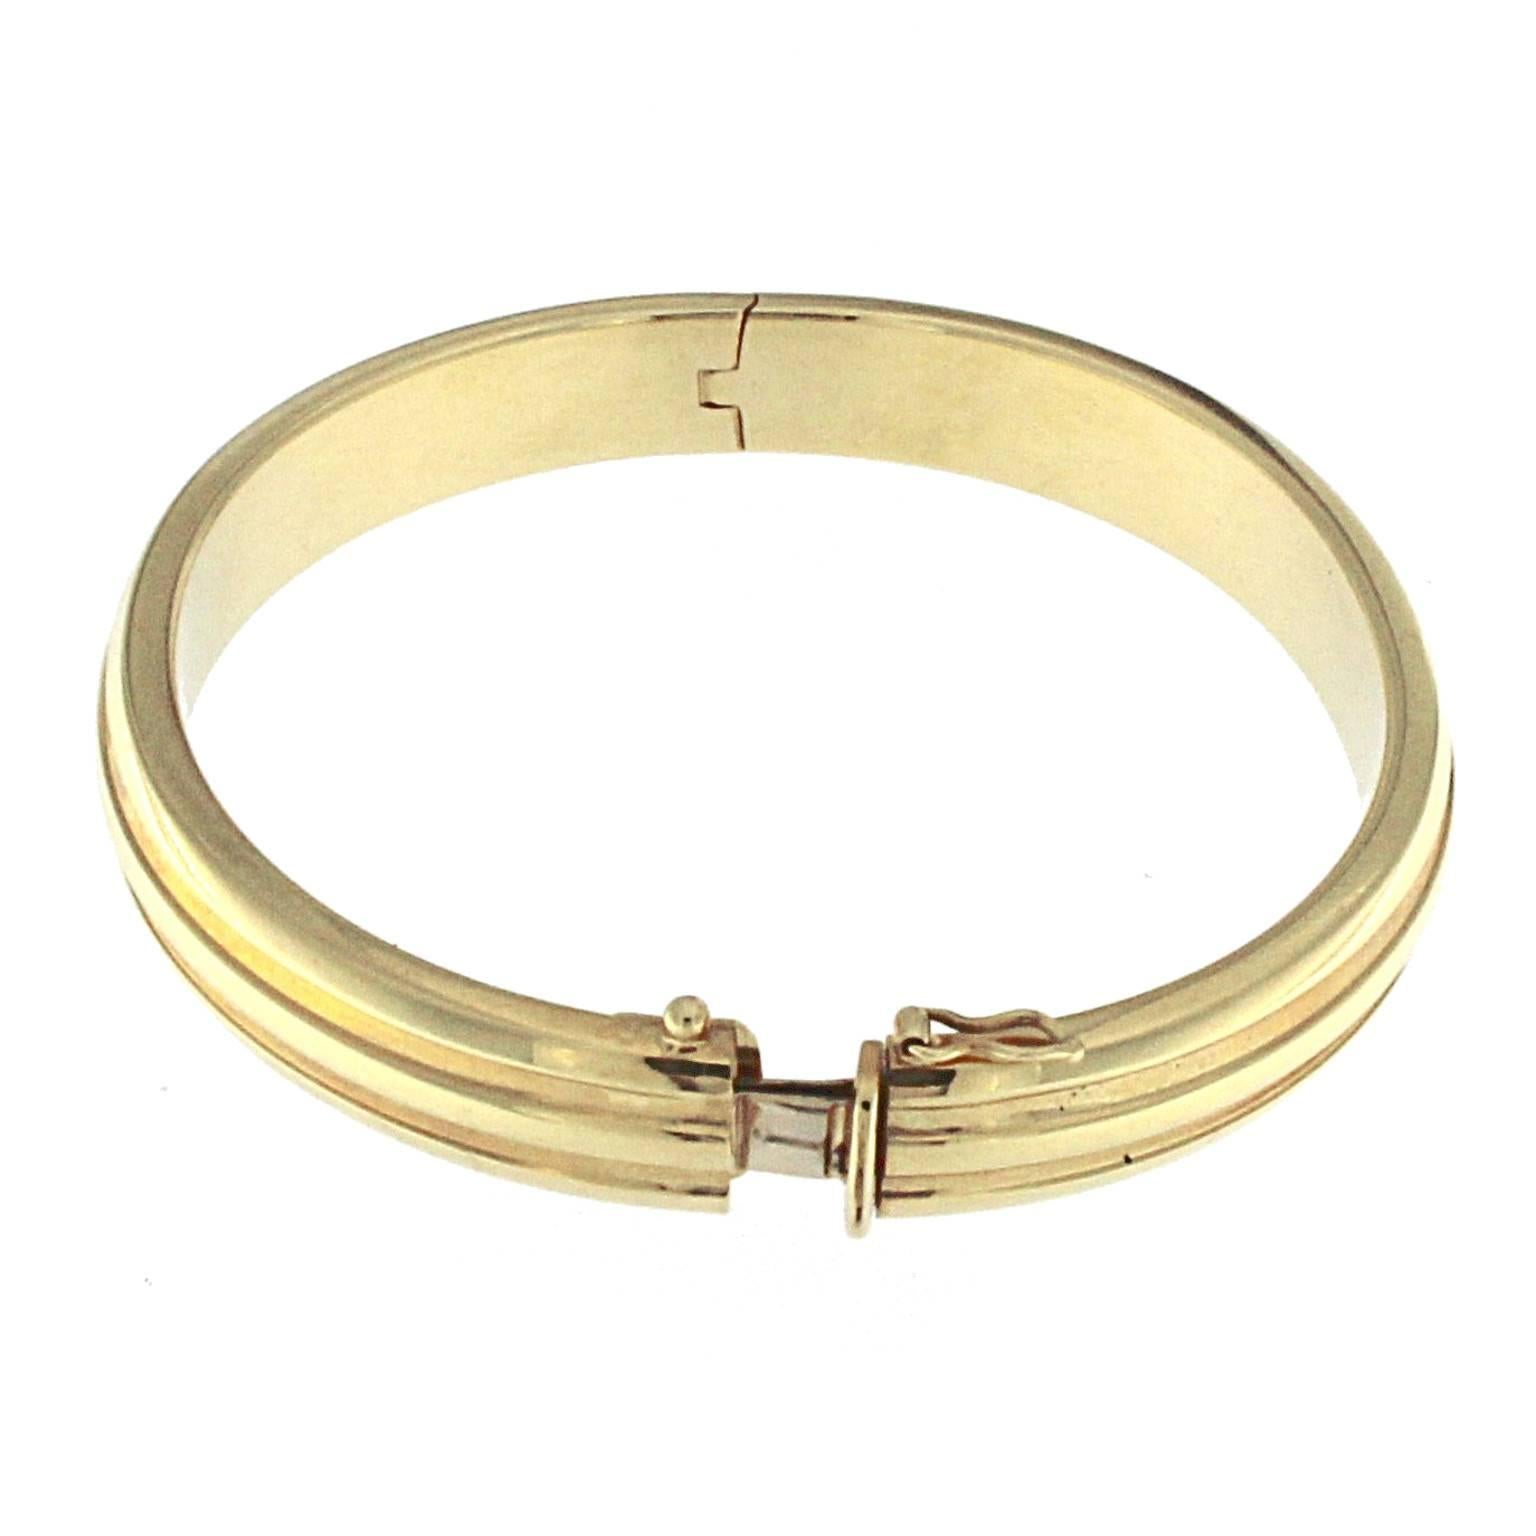 Rigid bracelet on oval shape made with thin semi round cane to perfectly fit the anatomy of the woman's wrist.
This bracelet is part of the collection  MINIMAL
Made entirely of yellow gold 
The total weight of the gold is GR 24.60
Stamp 750 10 MI